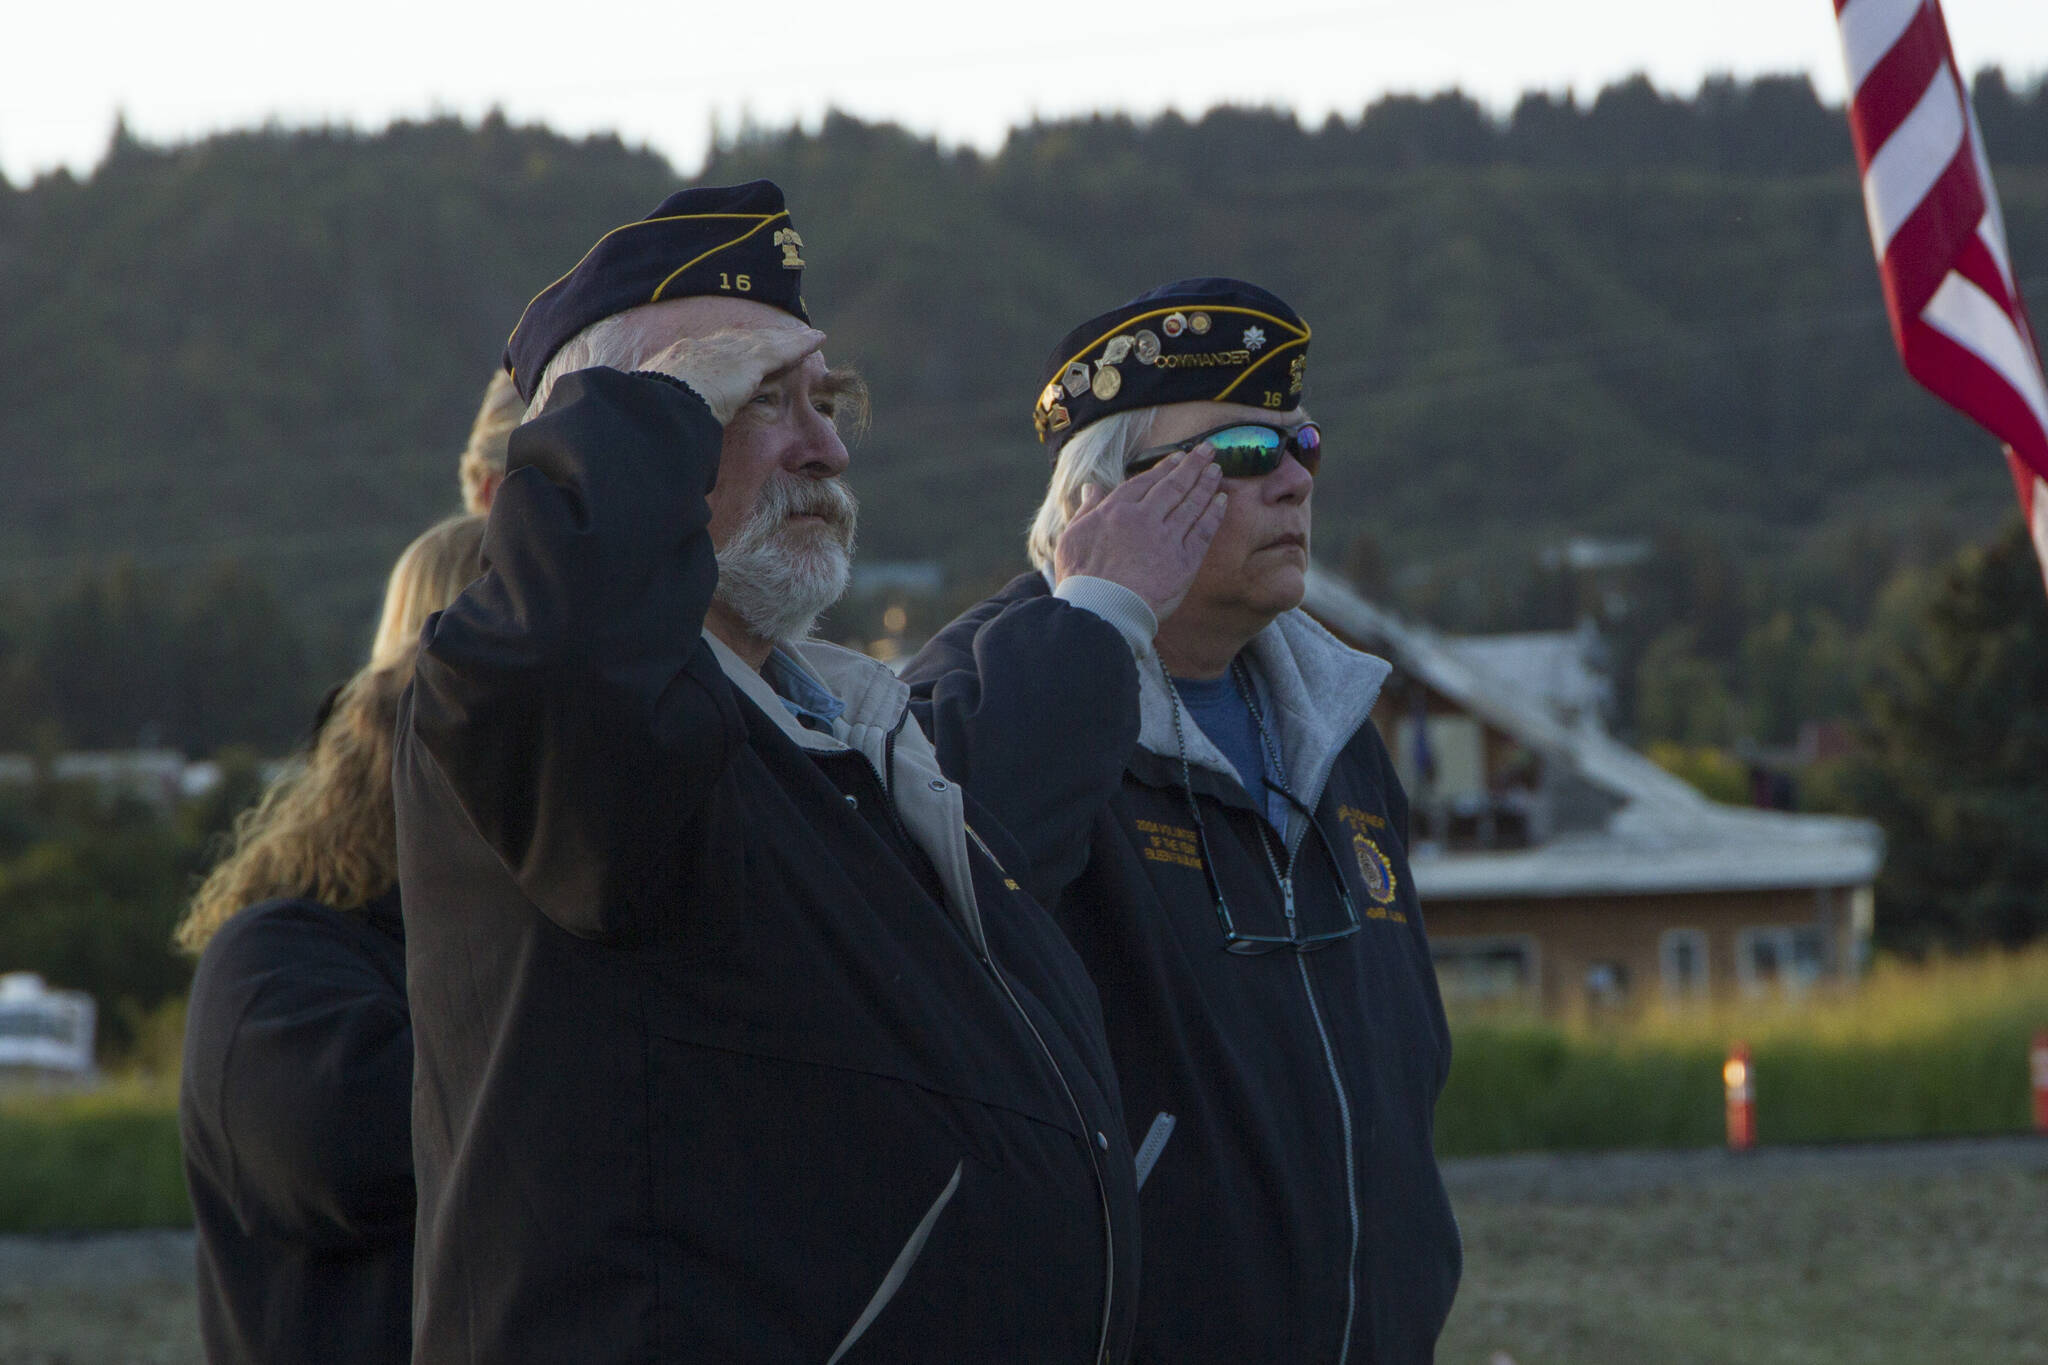 Members of the American Legion Post 16 salute the American flag while “Taps” is played. (Photo by Sarah Knapp/Homer News)